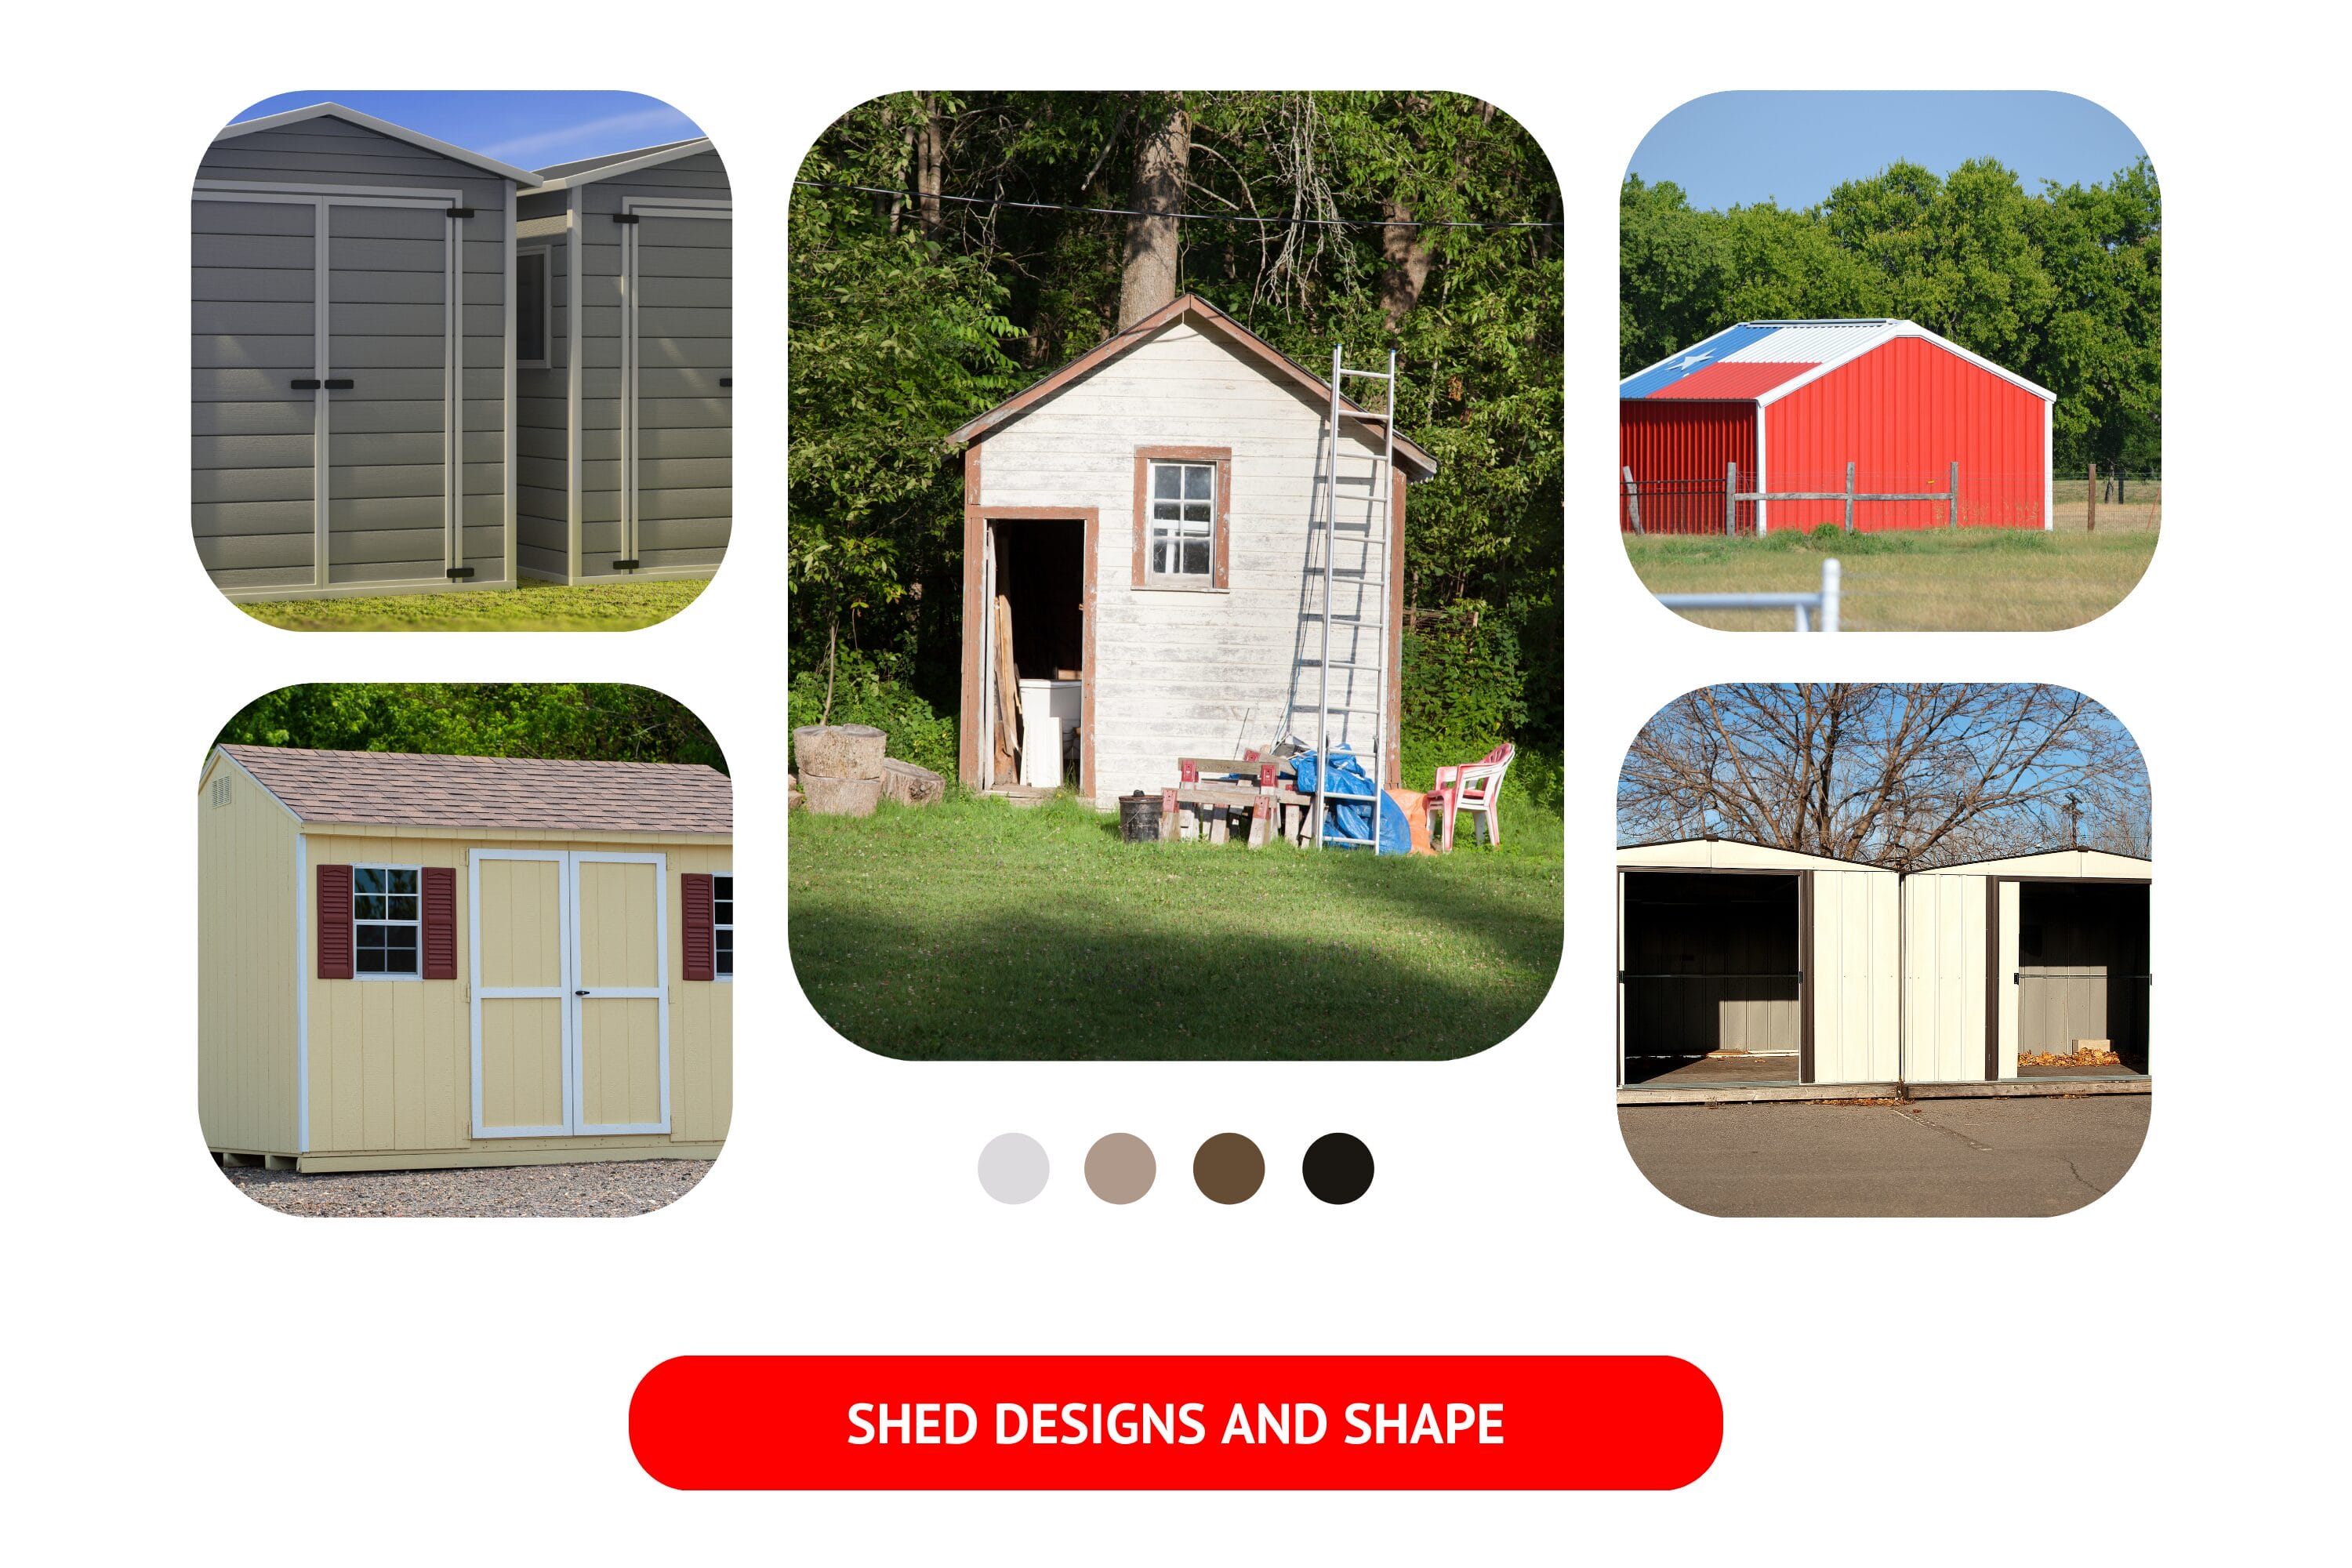 When it comes to designing sheds, there are a wide variety of options available. 